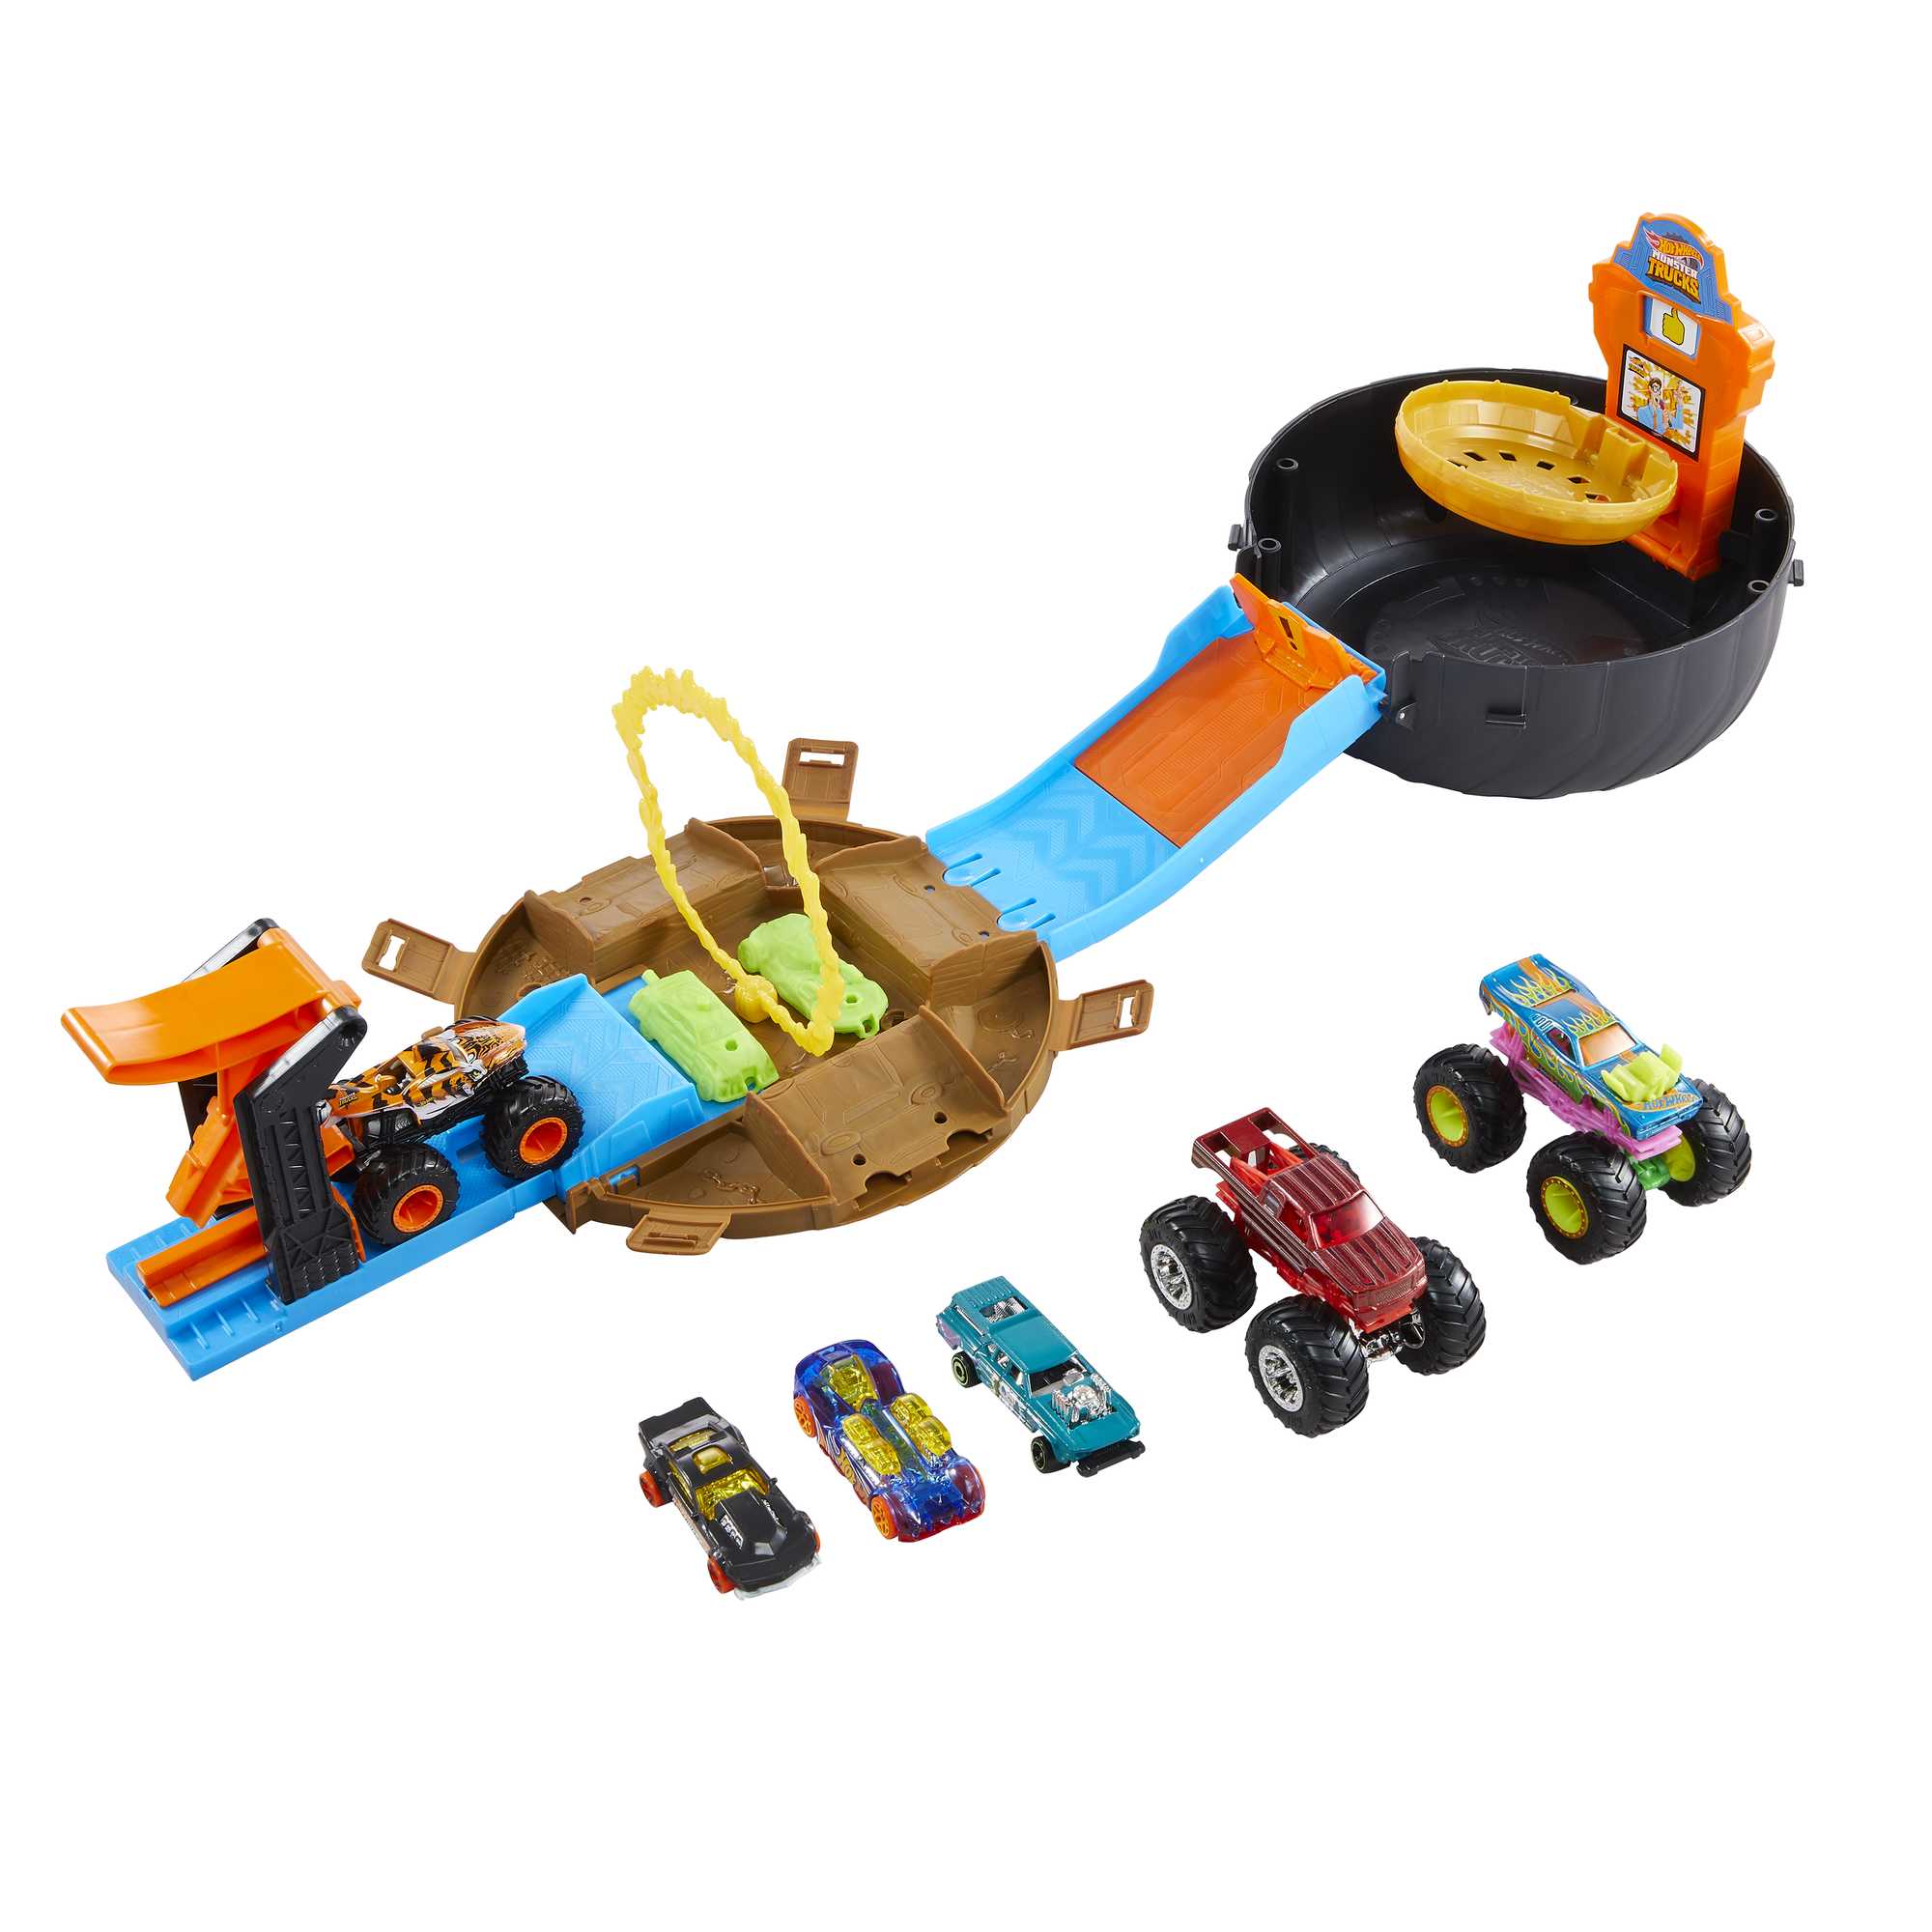 Hot Wheels Lift & Launch Hauler Toy Truck with 10 Cars in 1:64 Scale,  Transporter Stores 20 Vehicles 